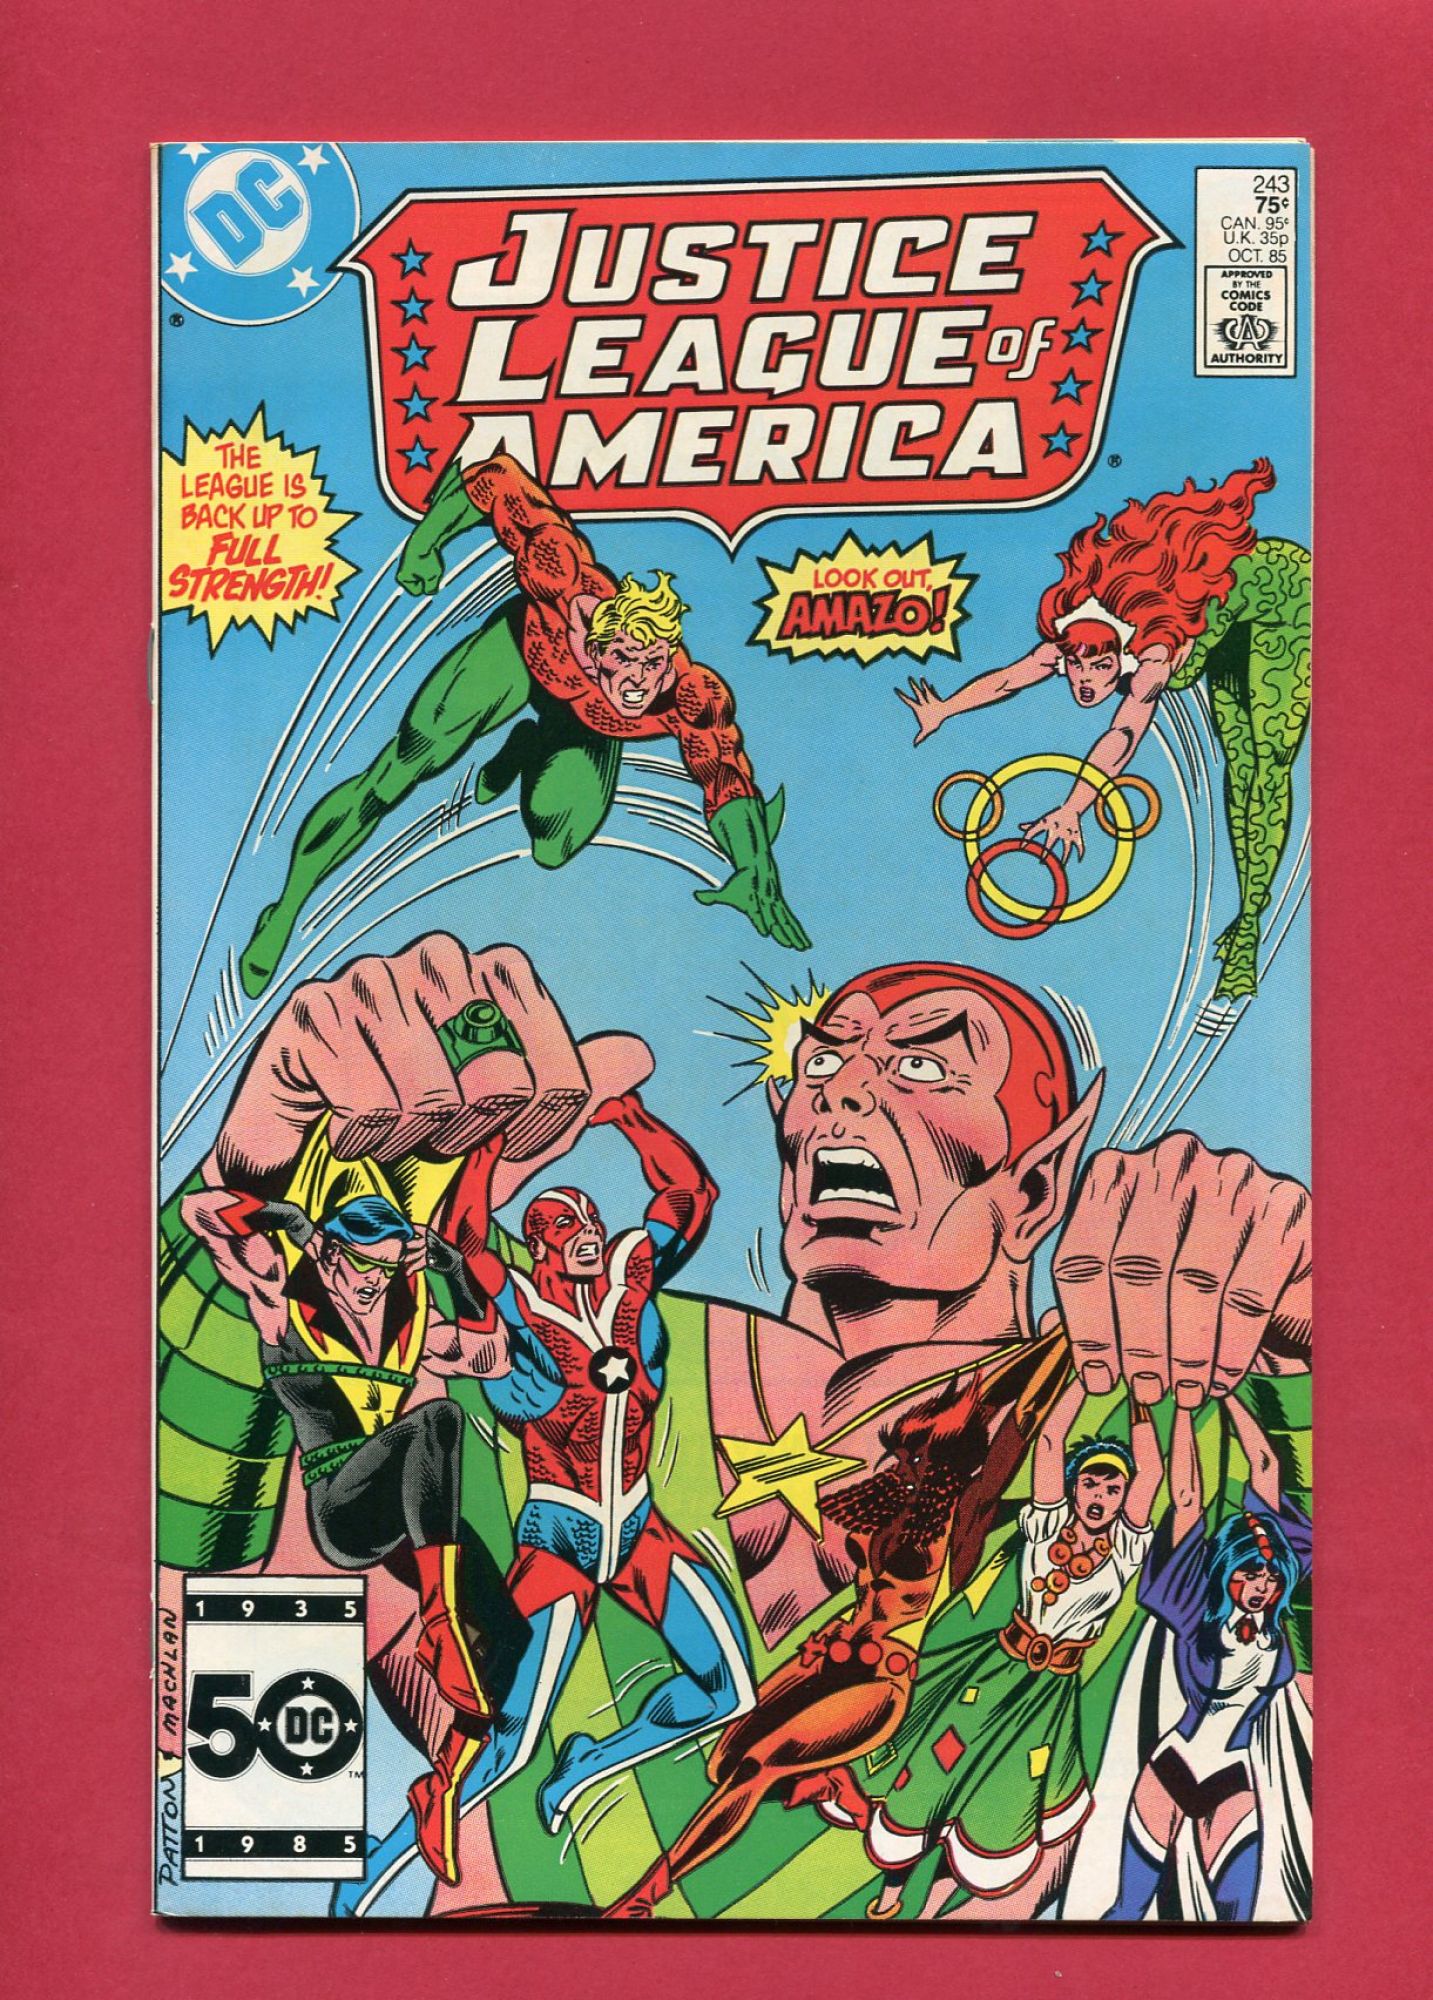 Justice League of America #243, Oct 1985, 8.0 VF